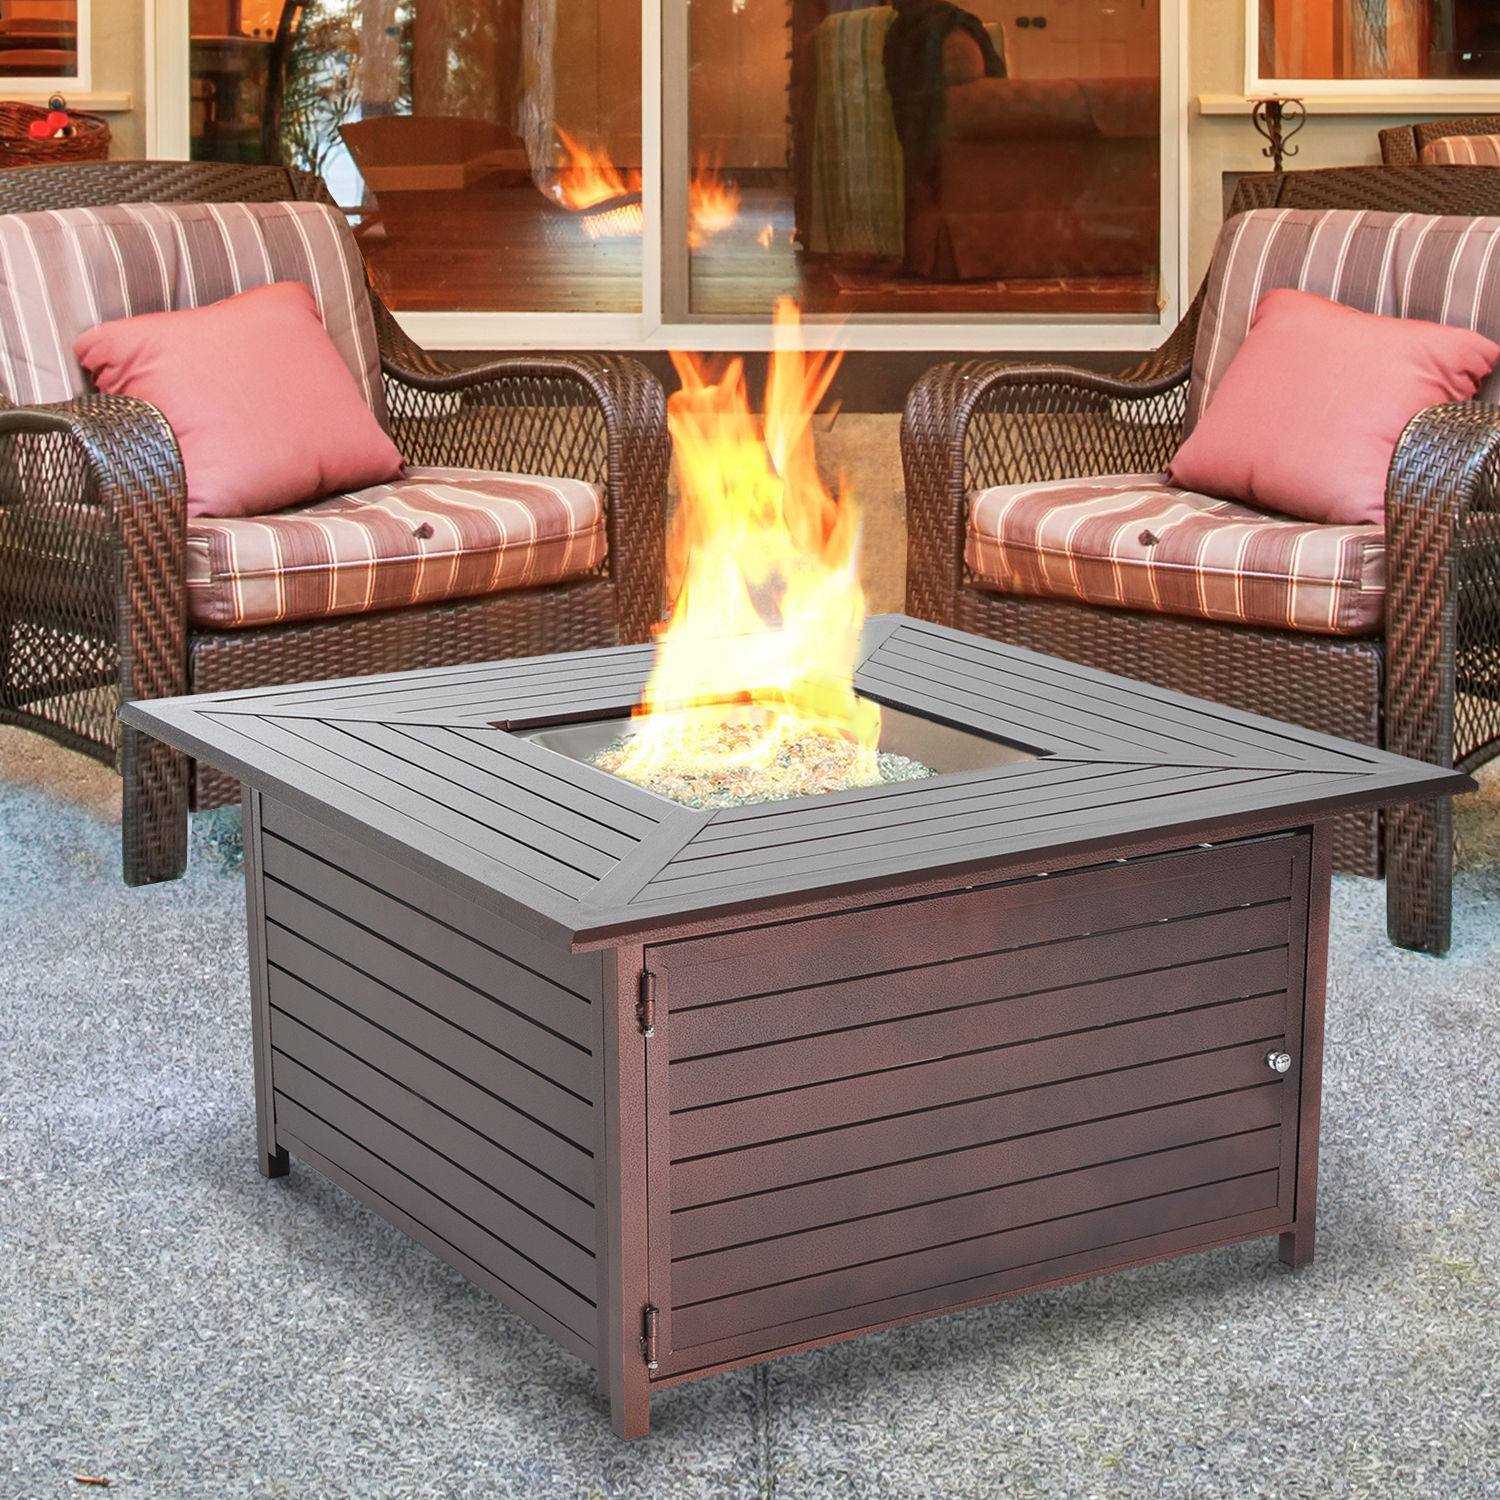 Patio Fire Pit Propane
 Outsunny 45" Slatted Steel Outdoor Propane Gas Fire Pit